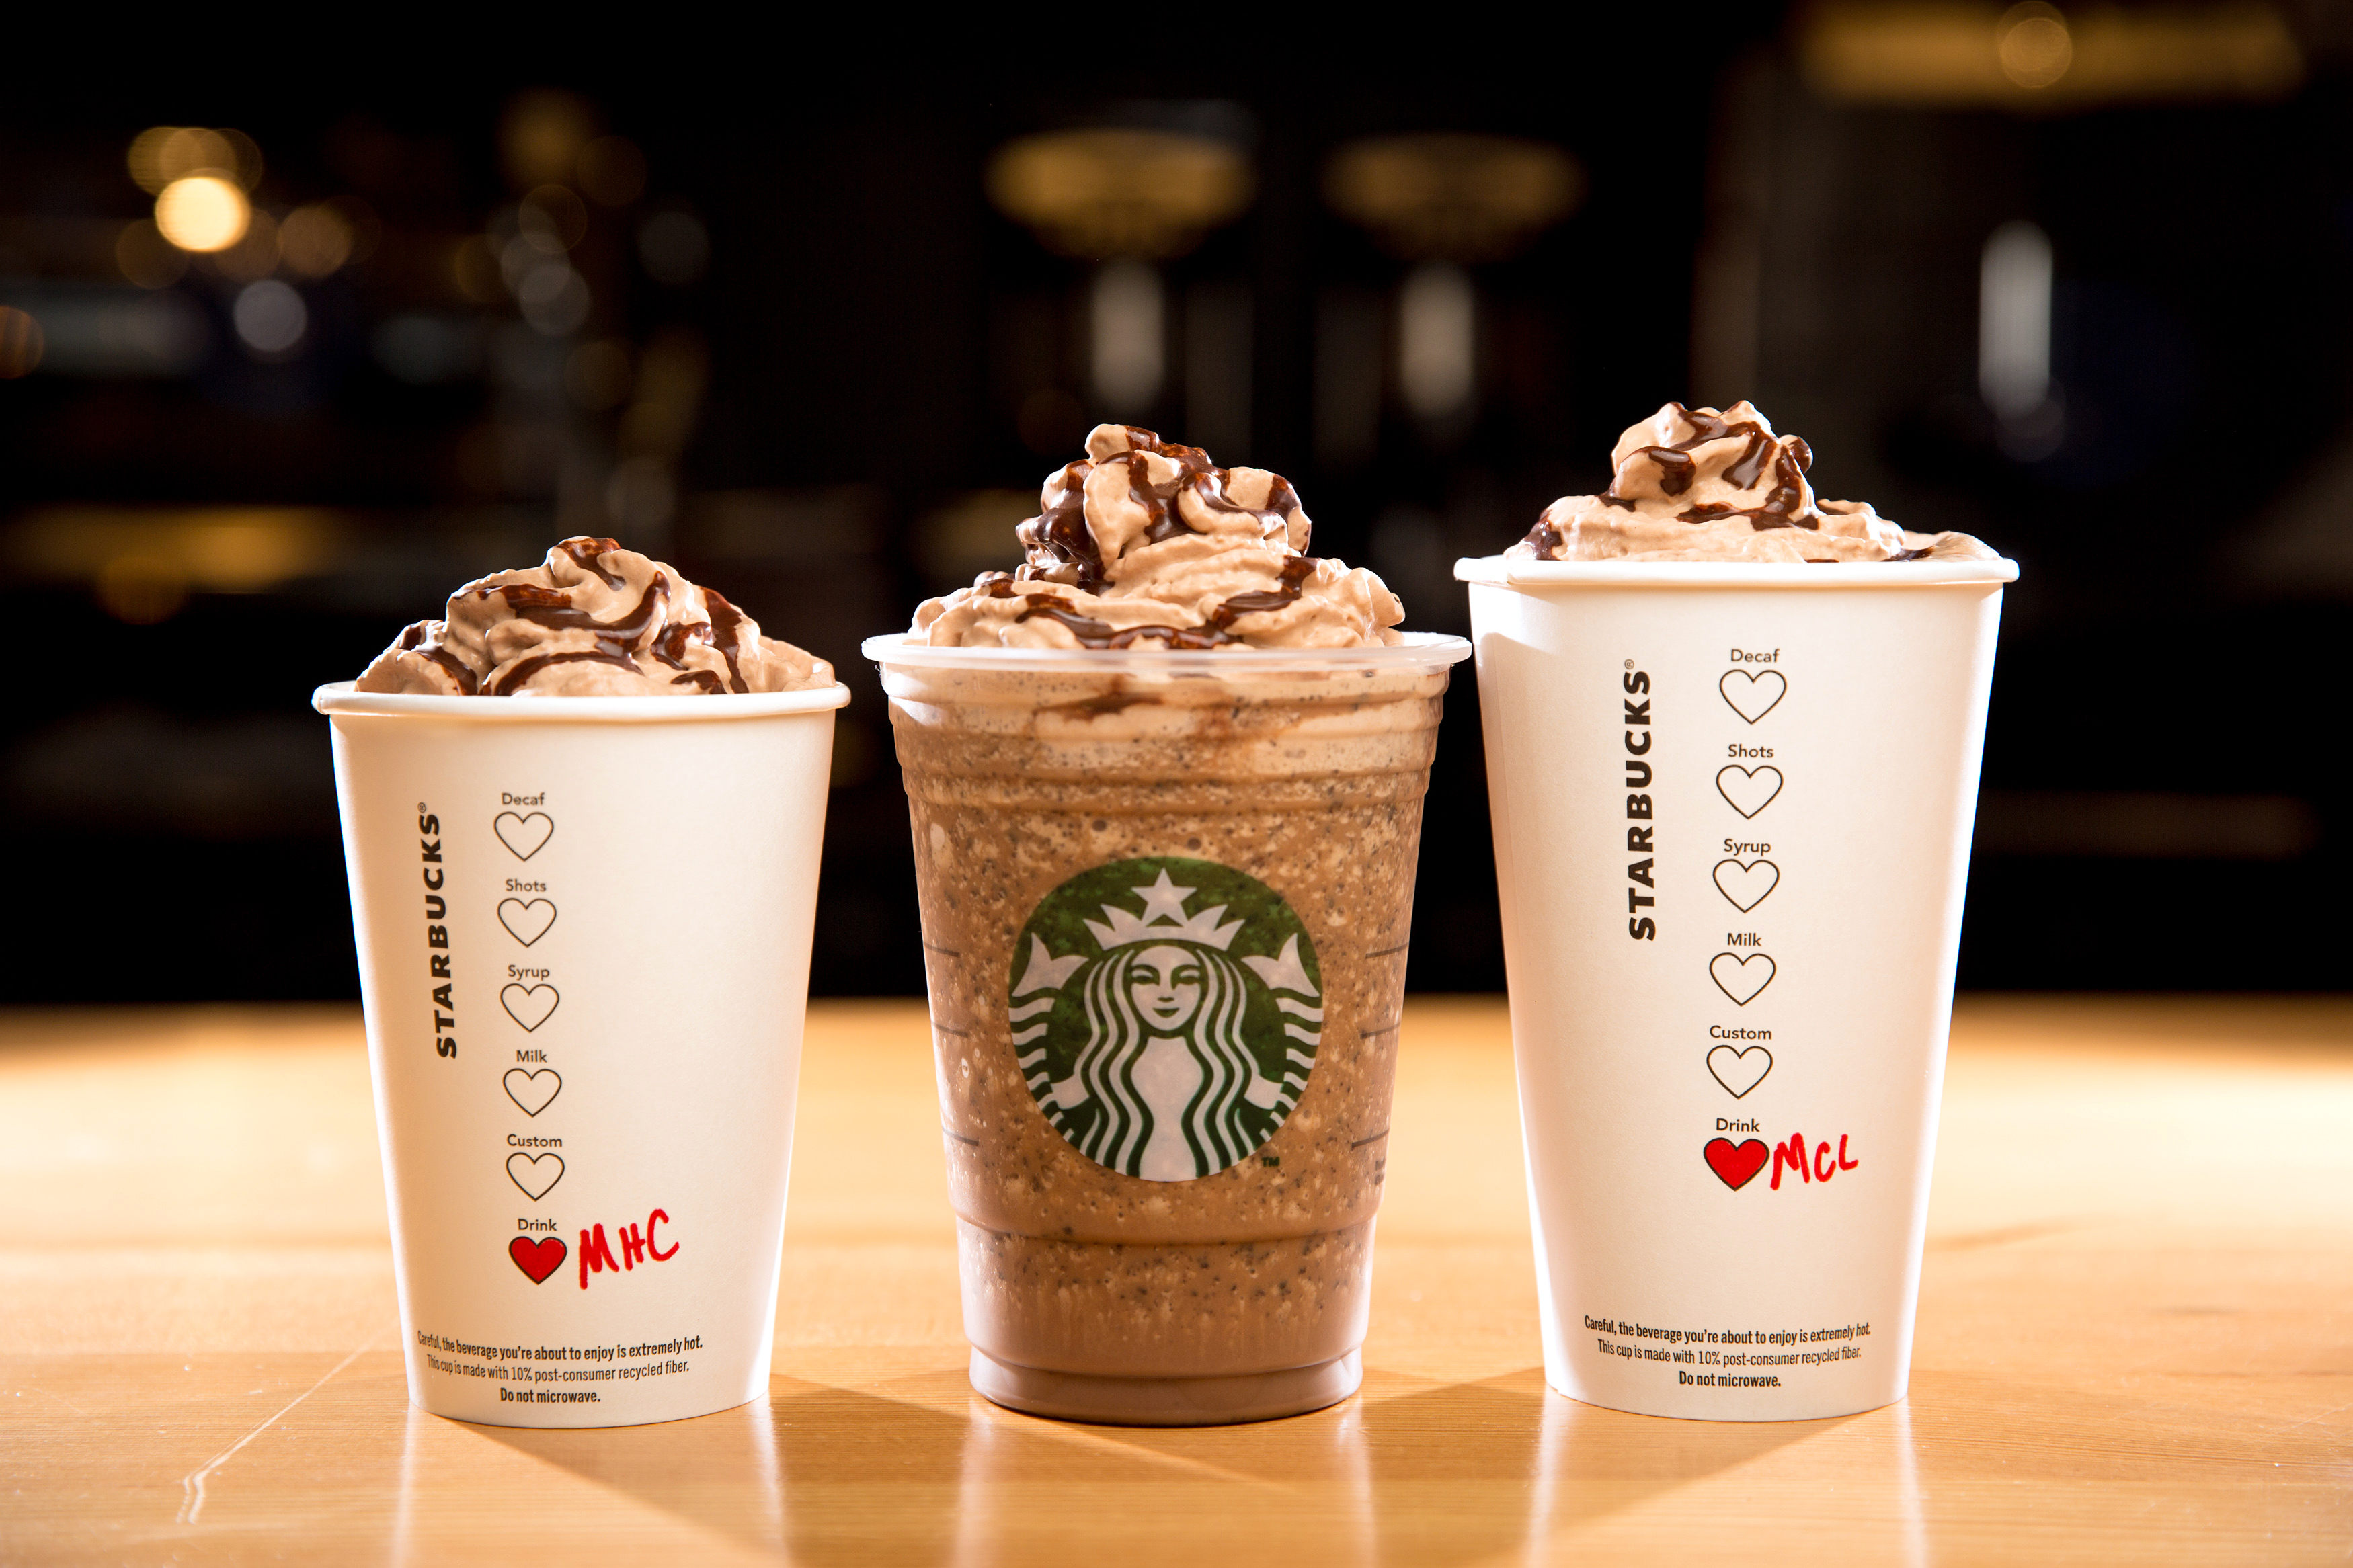 Why Do New Starbucks Drinks Have ‘Chocolatey’ Chips, Not Chocolate?